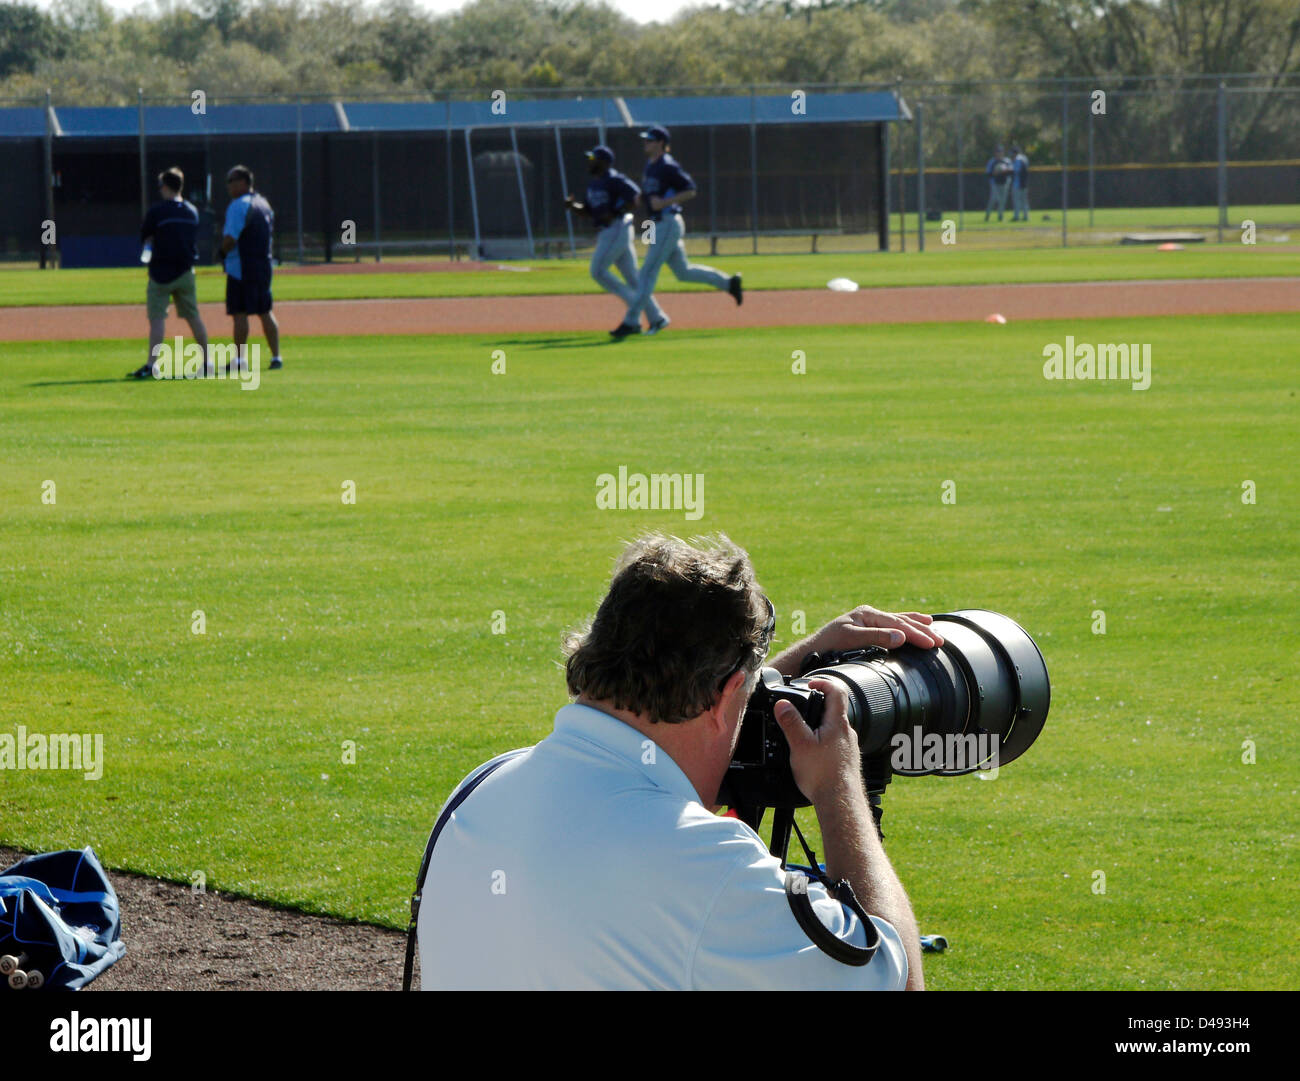 Sports photographer using long telephoto lens focuses on players during baseball spring training in Florida. Stock Photo